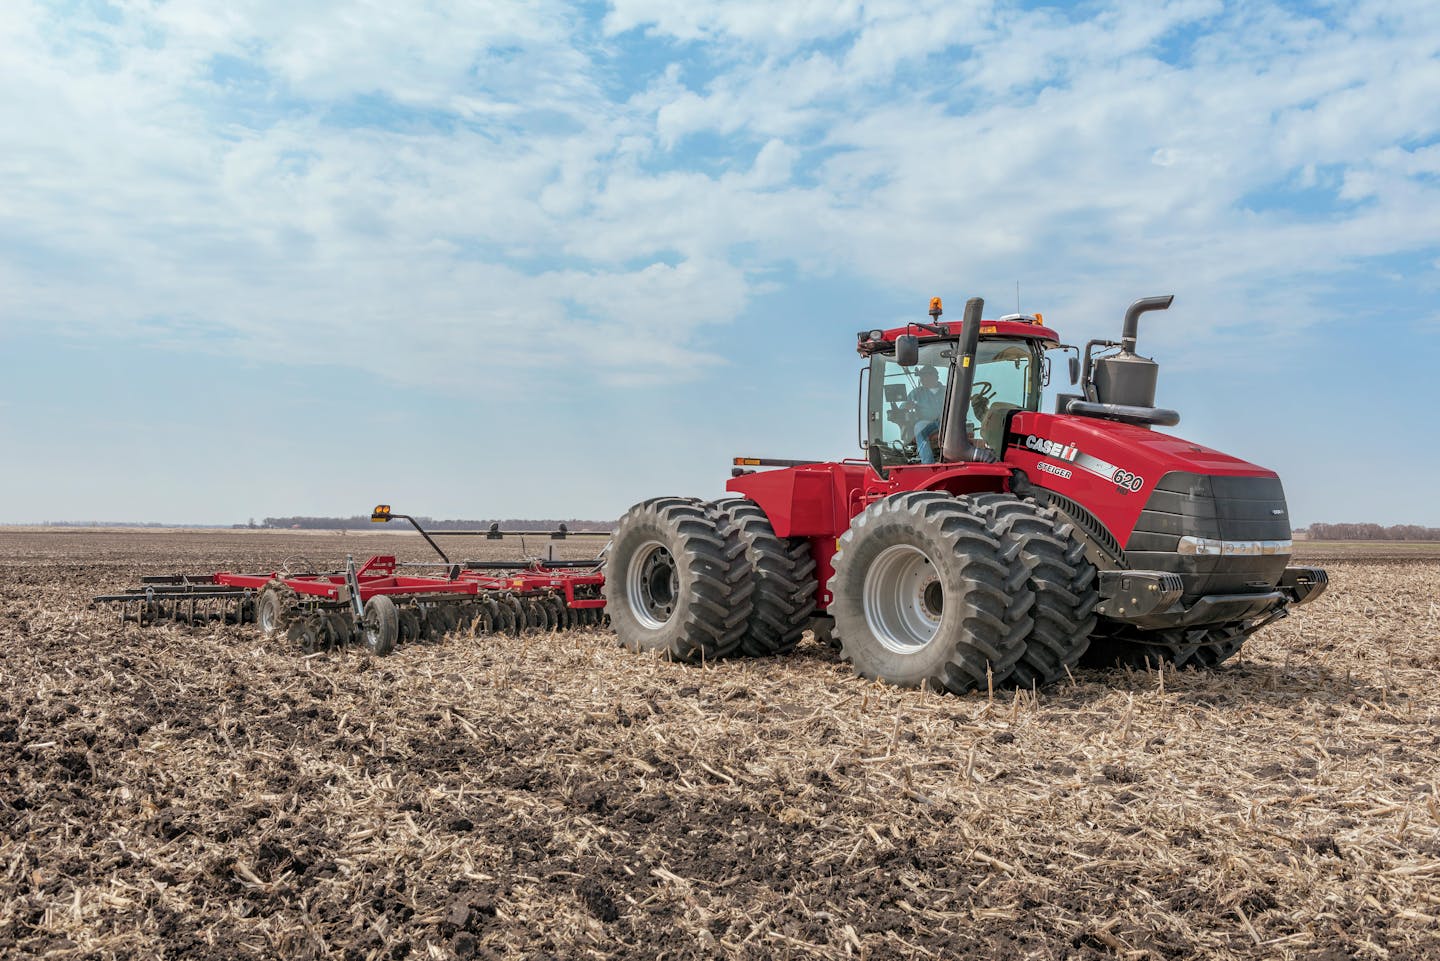 The Steiger 620 offers up to 680 horsepower to tackle difficult terrain and tough conditions.